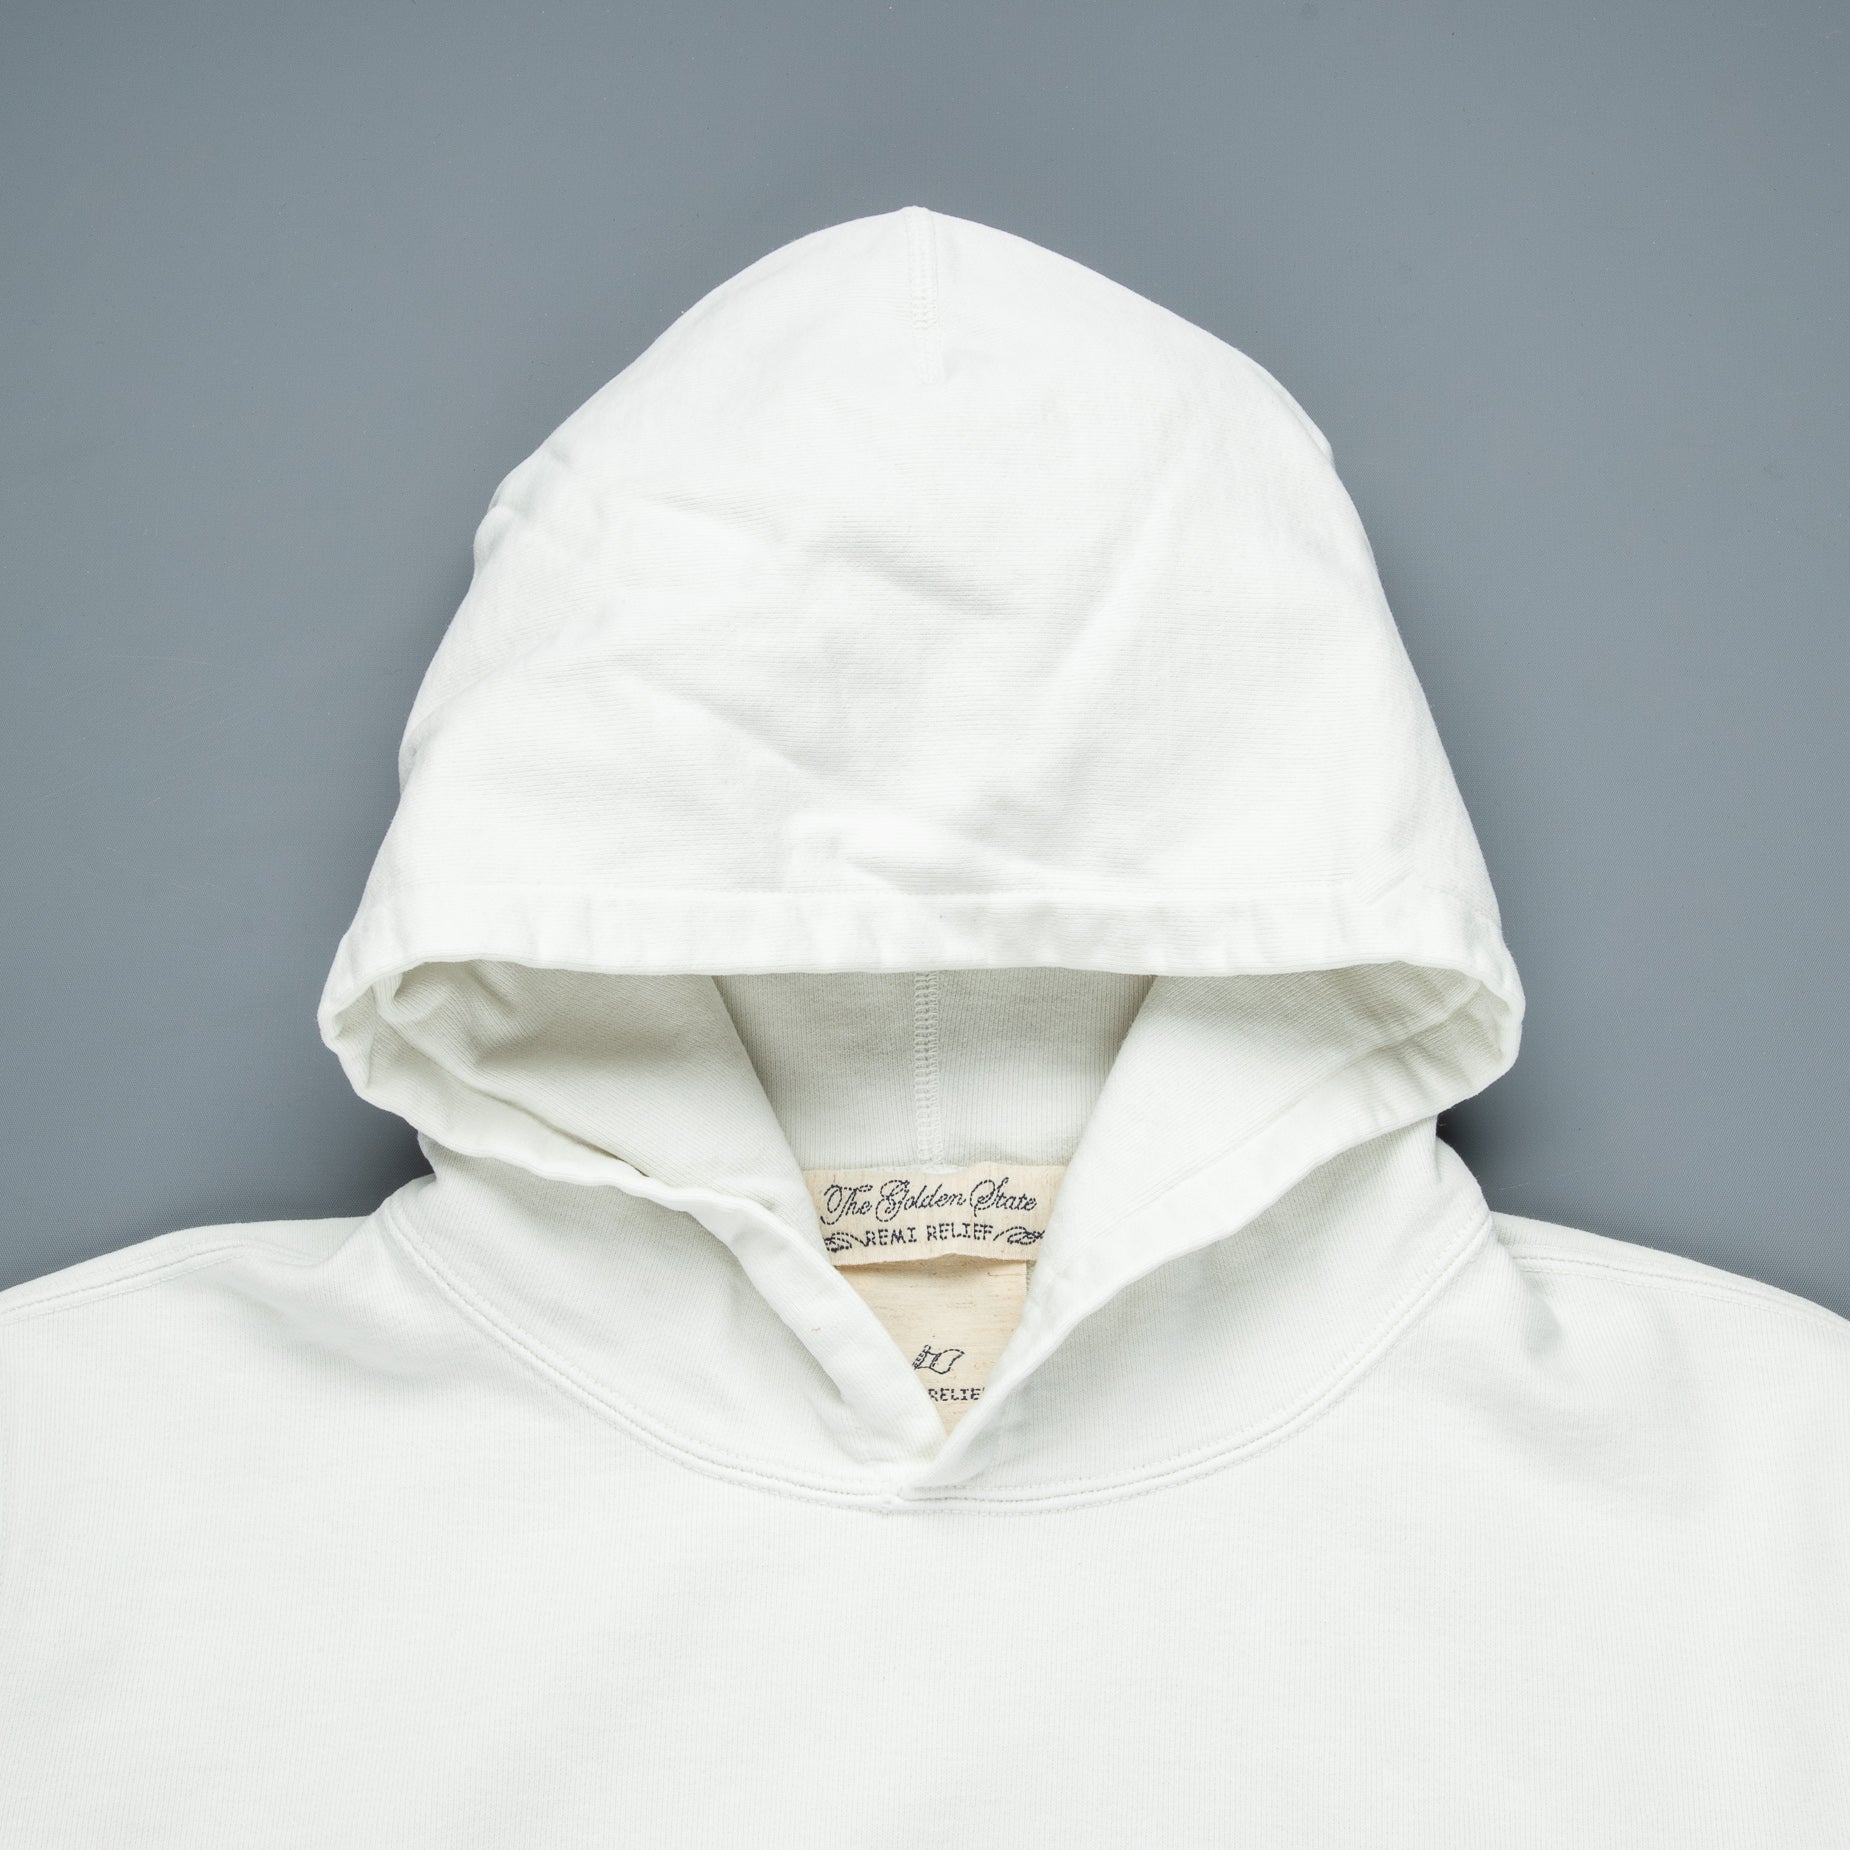 Remi Relief Hooded Sweat Off White